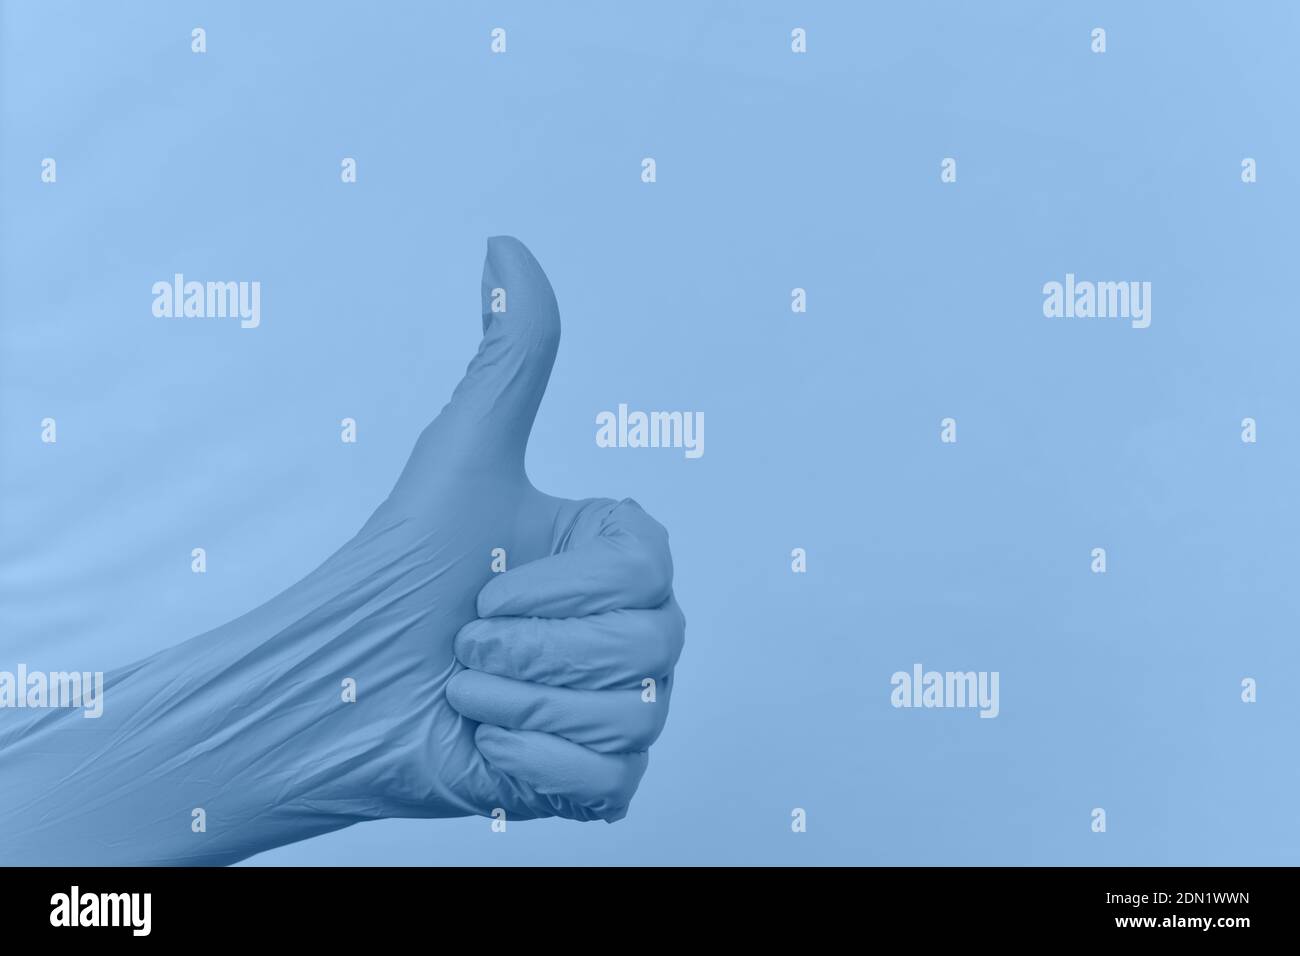 Gesture of a hand thumb up in a rubber glove color placid blue against a raised tinted background with folds. Stock Photo